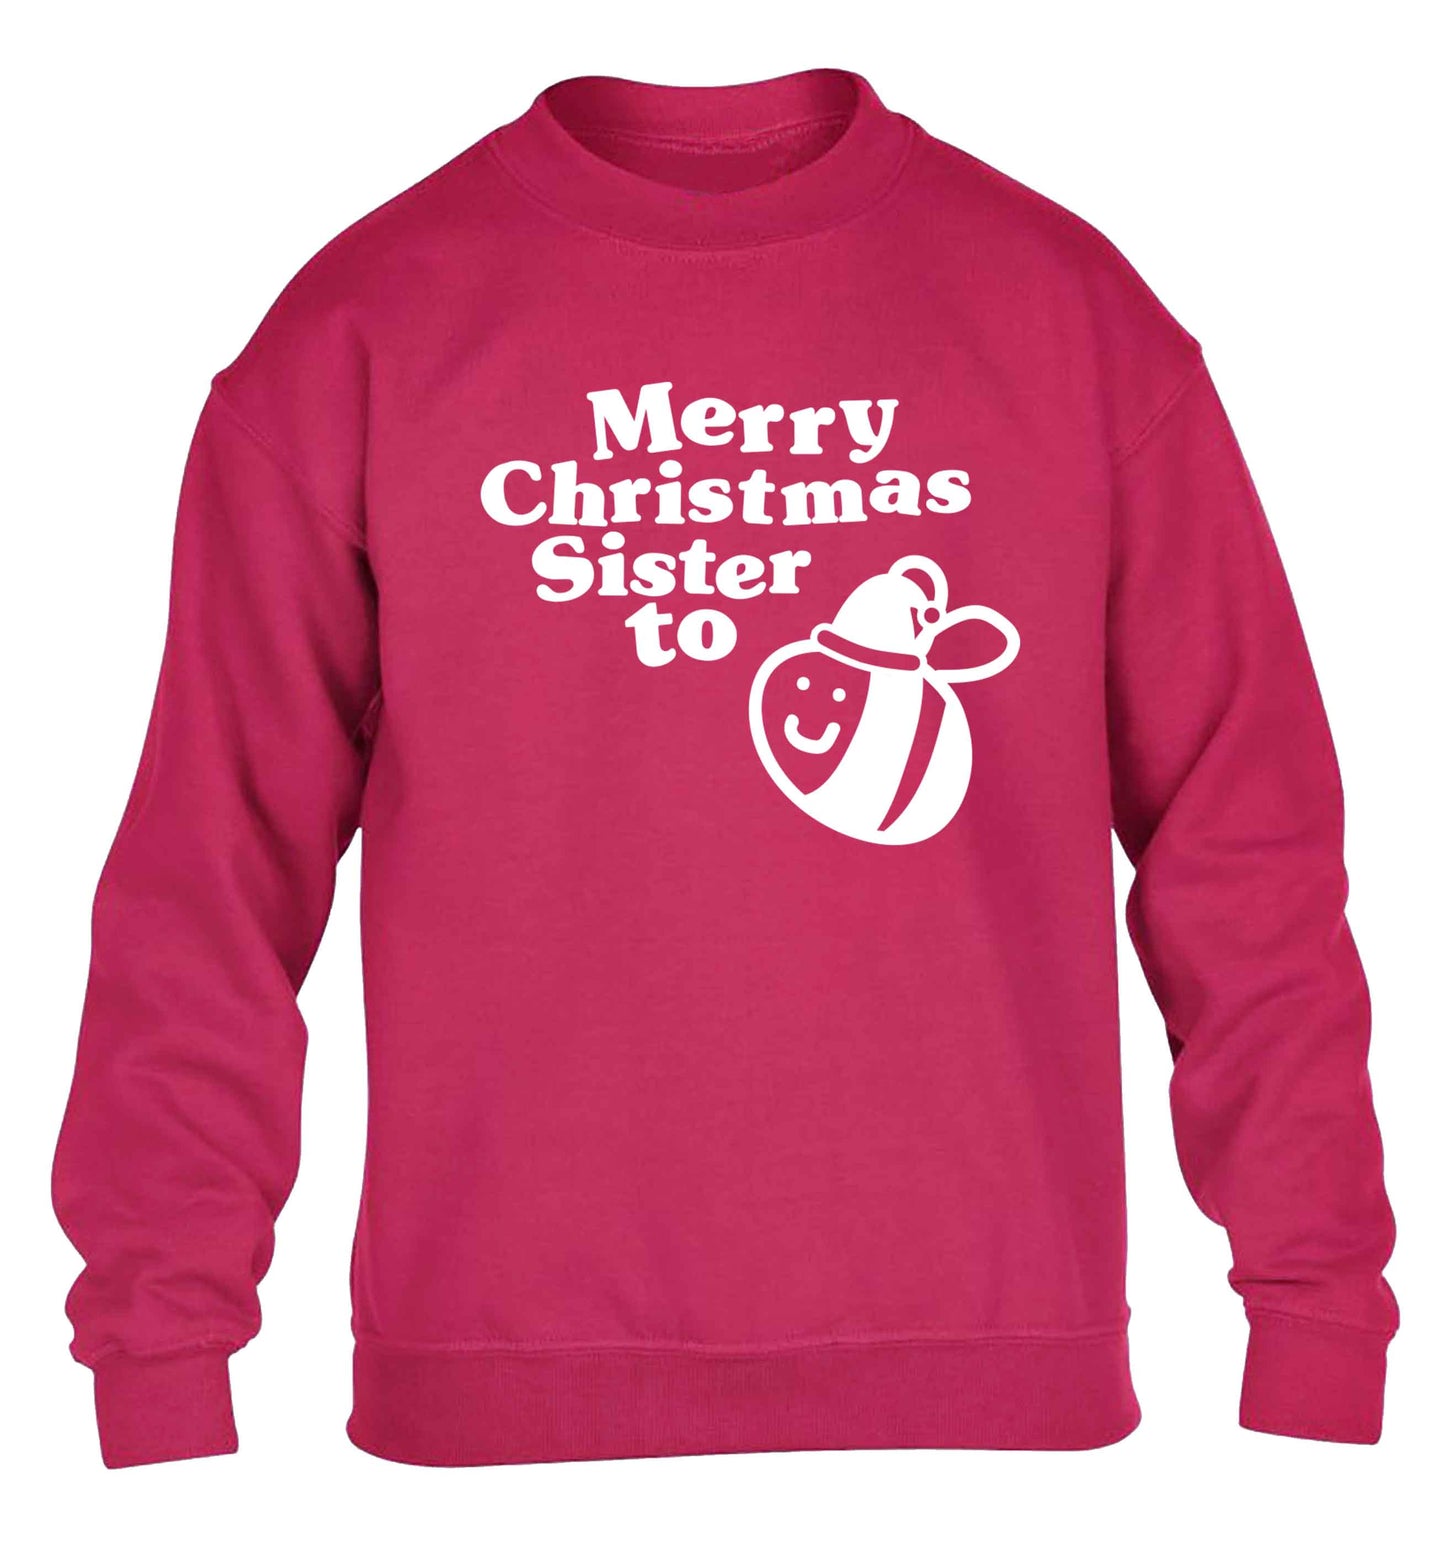 Merry Christmas sister to be children's pink sweater 12-13 Years